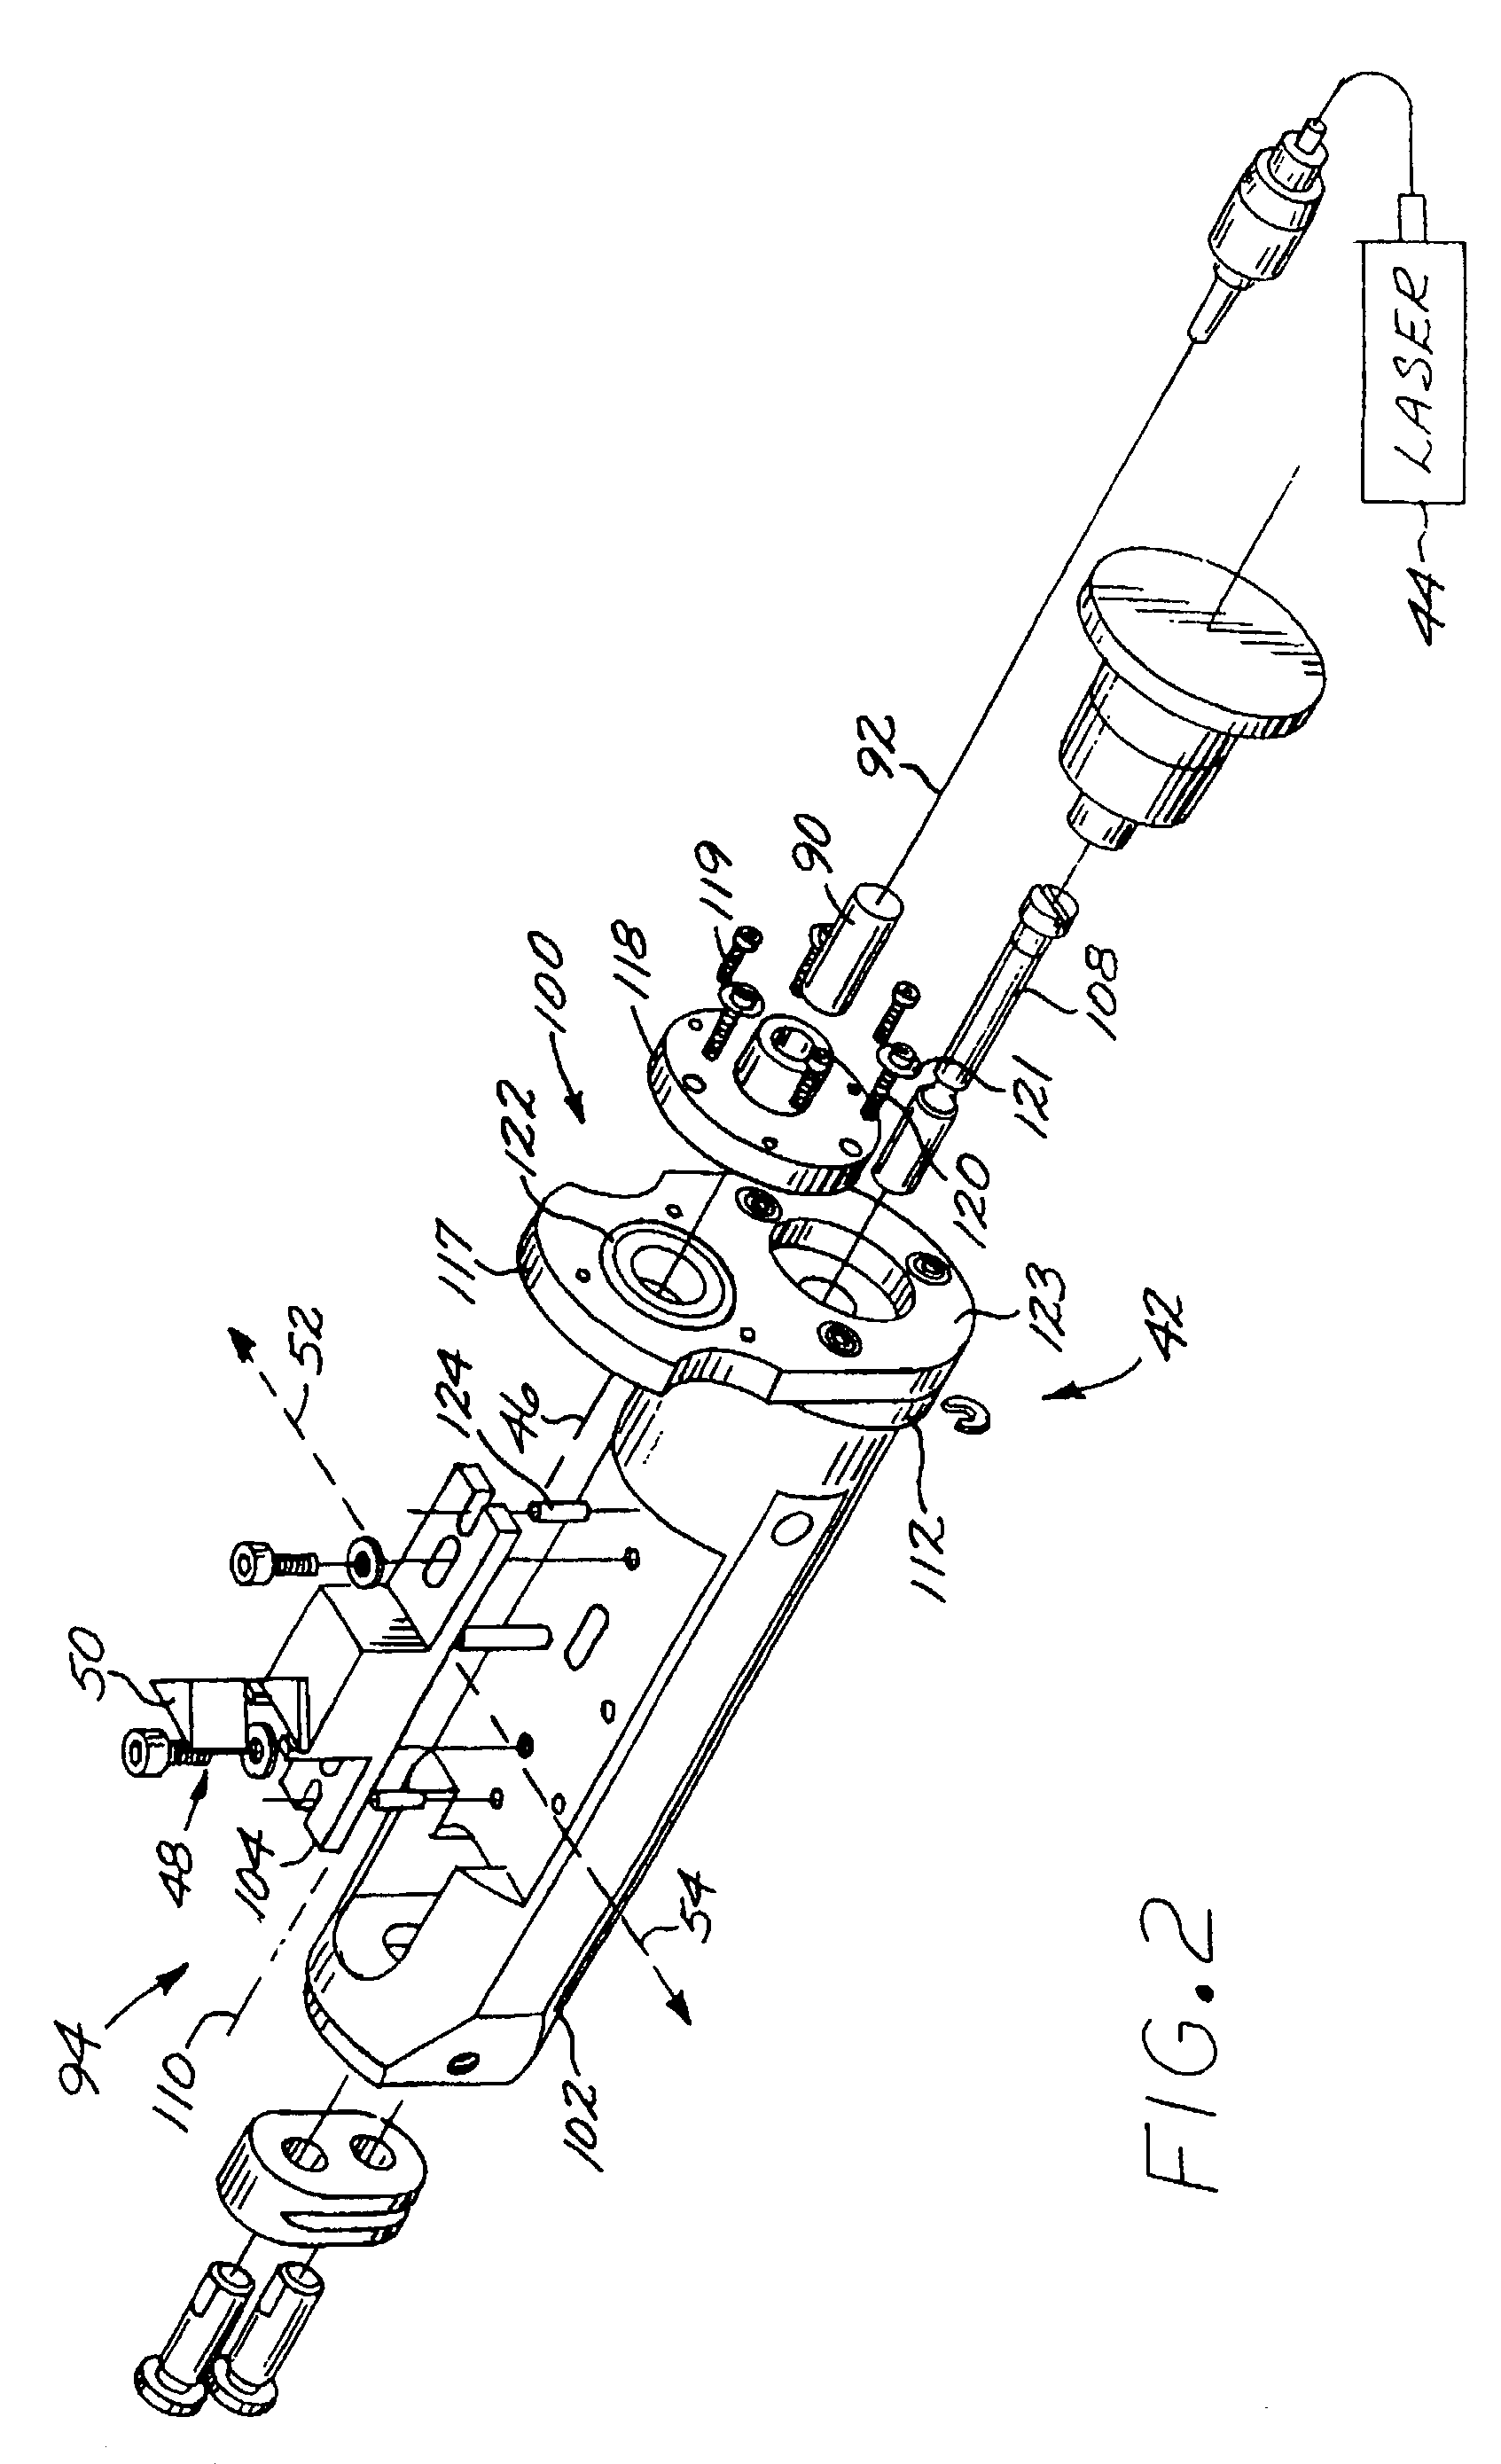 Optical measurement apparatus with laser light source